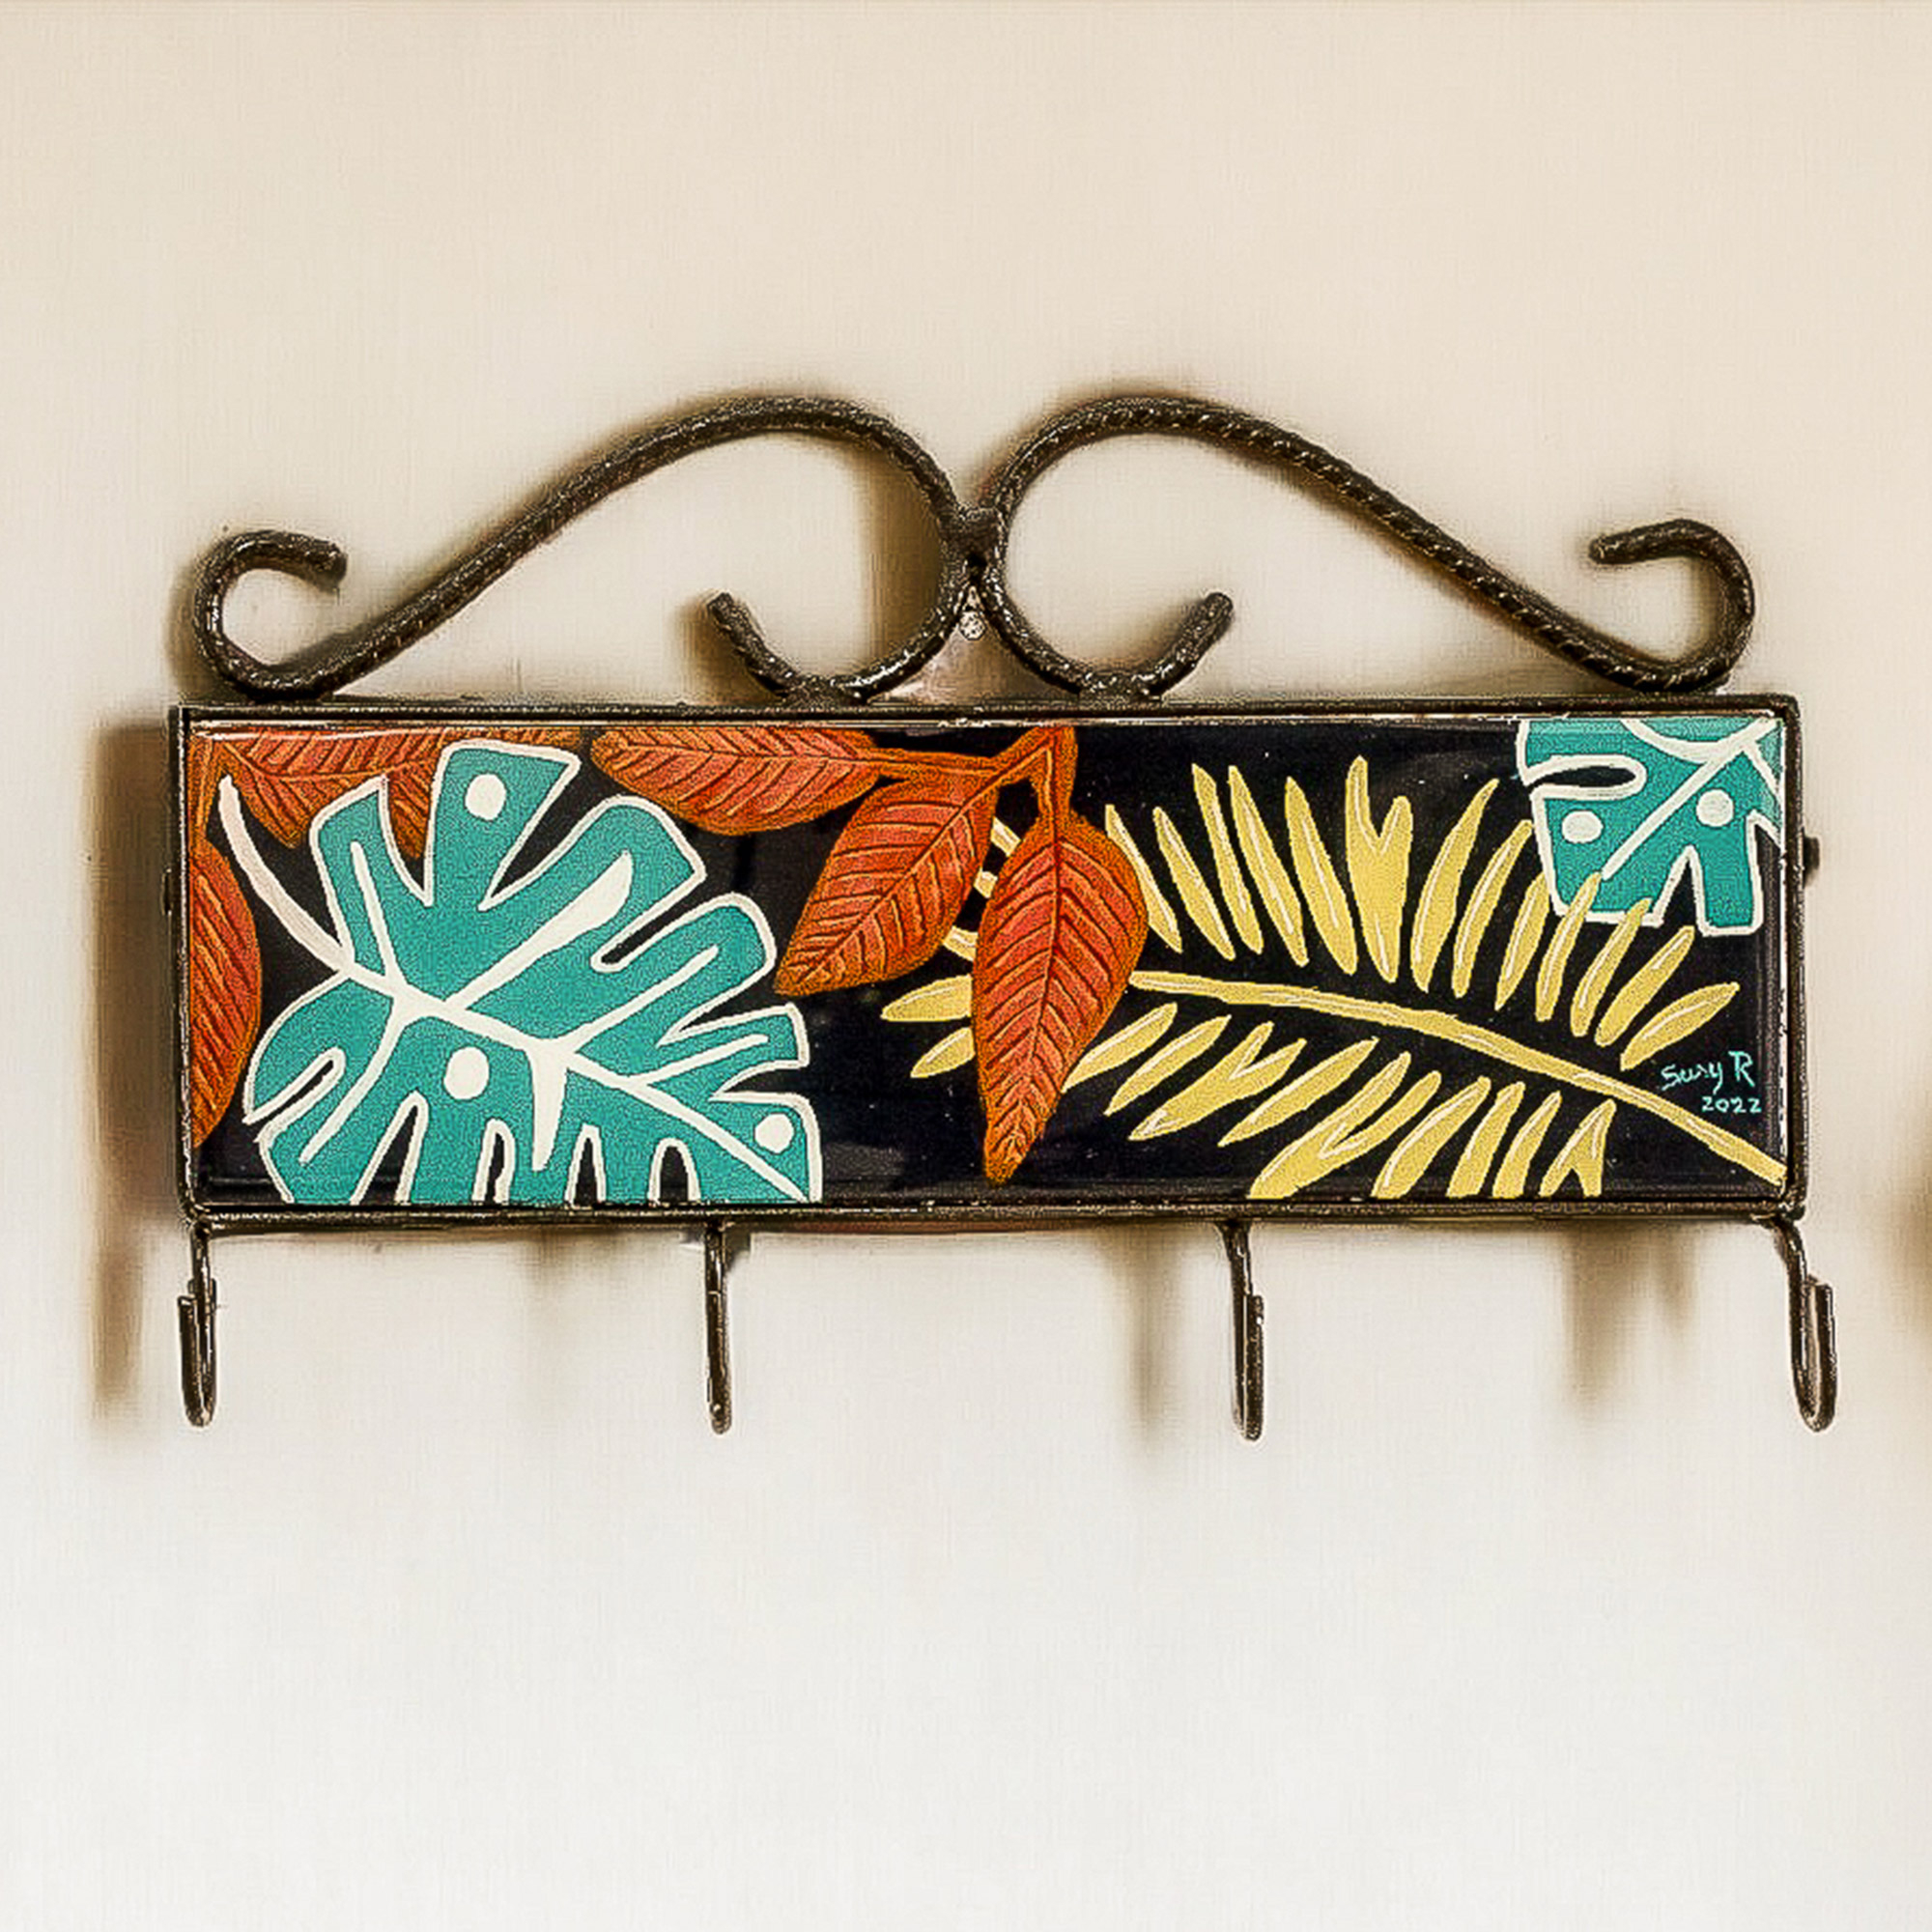 Costa in NOVICA | and Rica Nights - Iron Wood Rack Black Laurel Leafy Hand-Painted Key